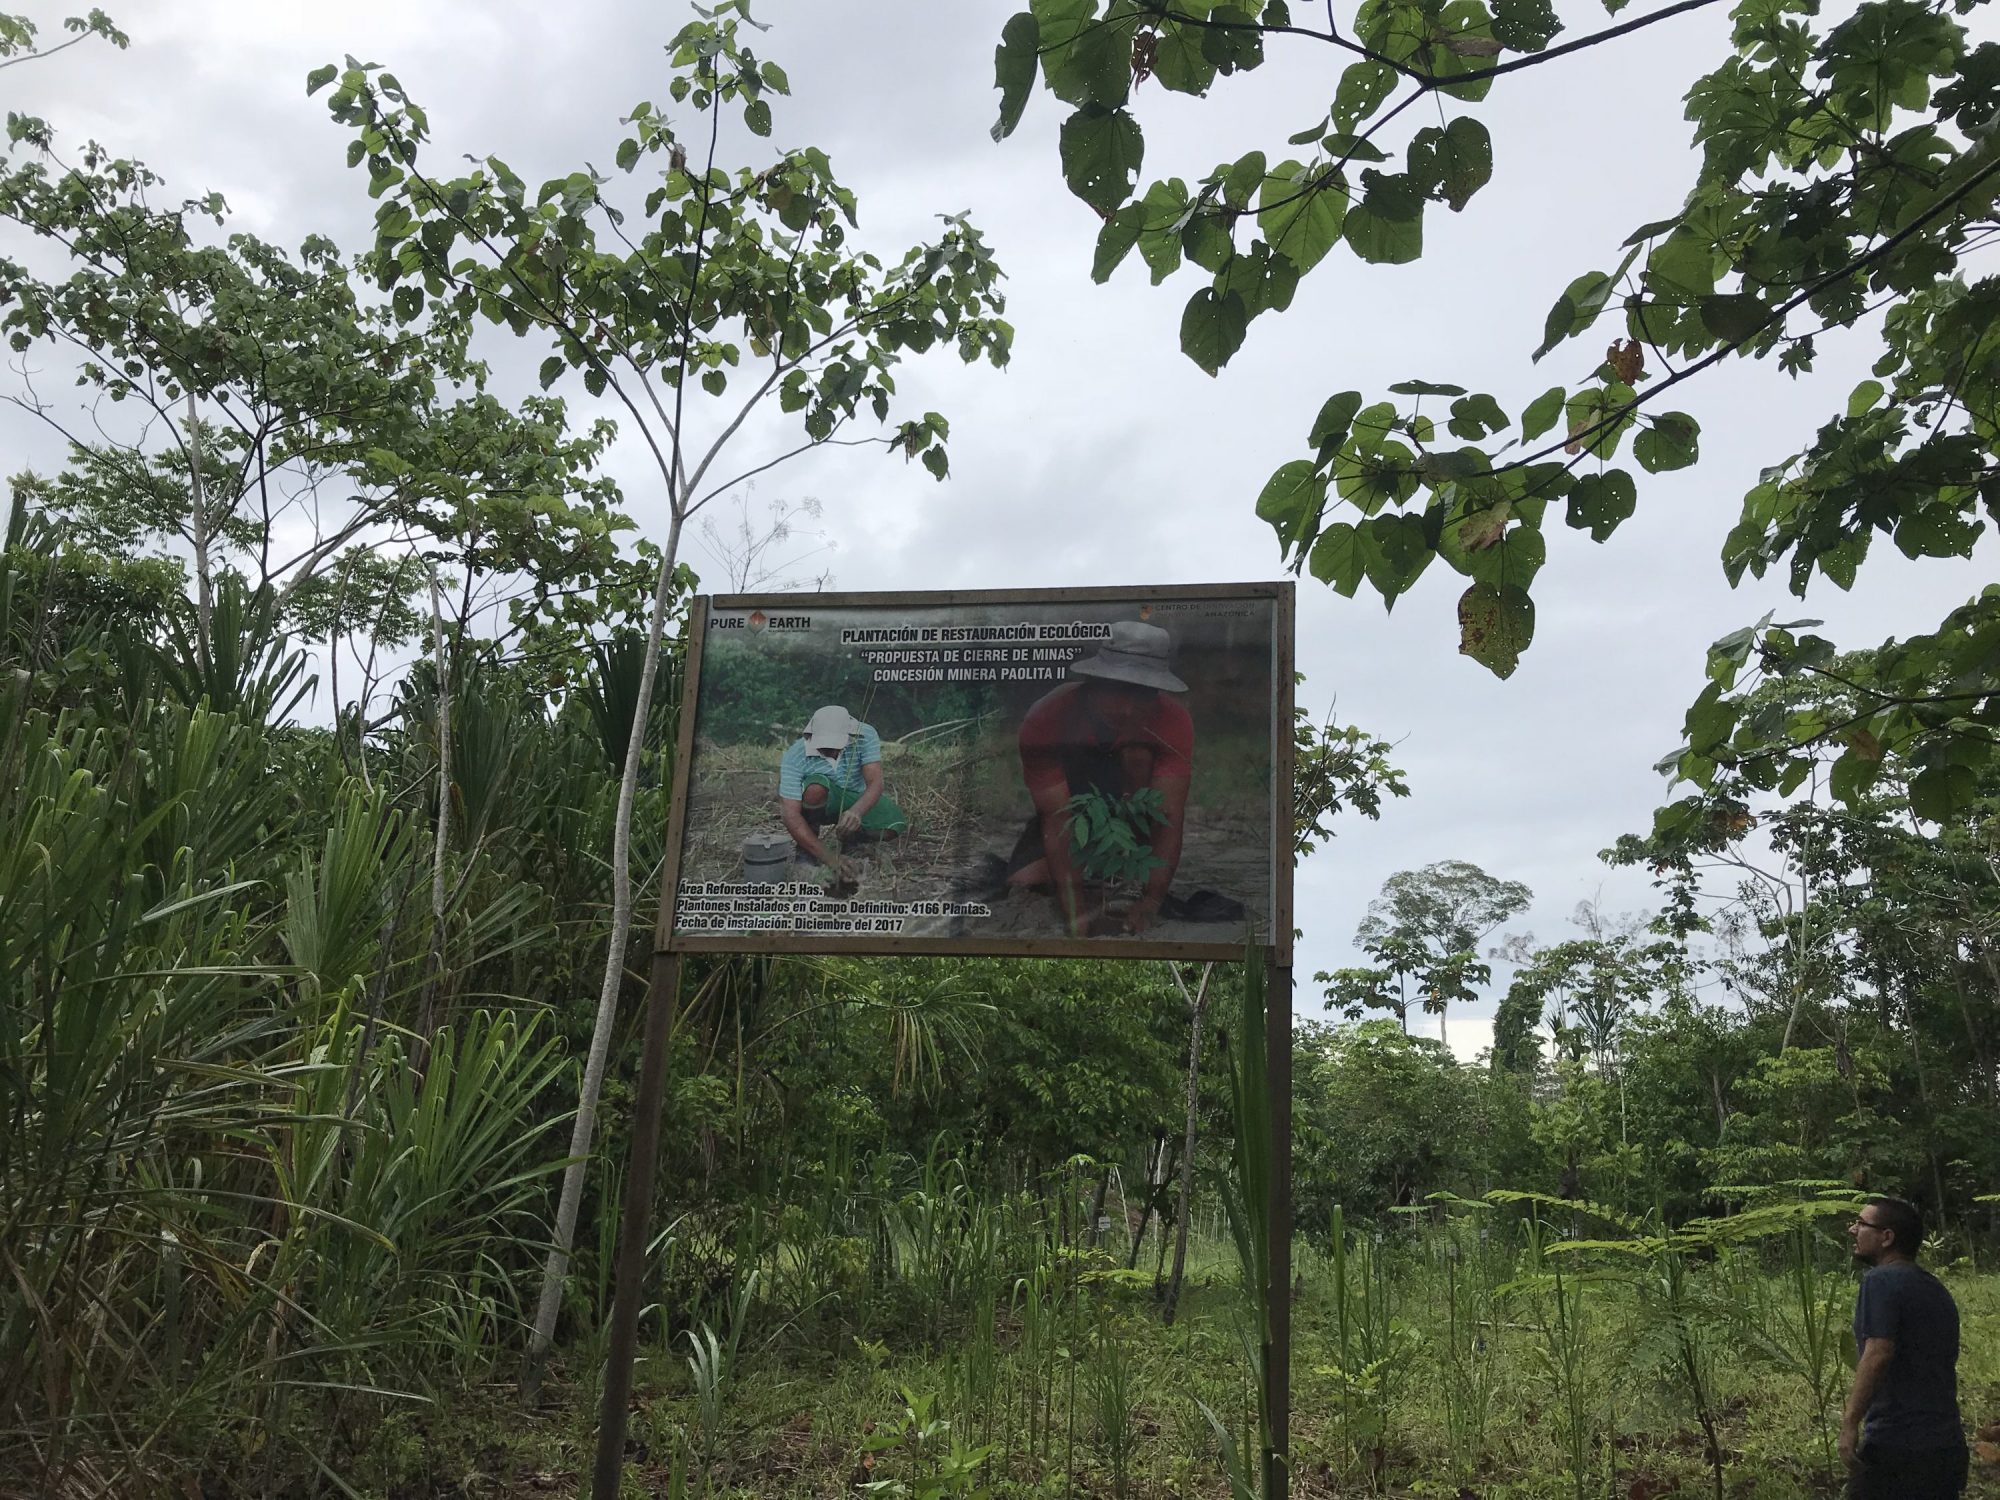 Rainforest reforestation - A signboard explains the replanting at the Paolita II site, a project by Pure Earth and CINCIA